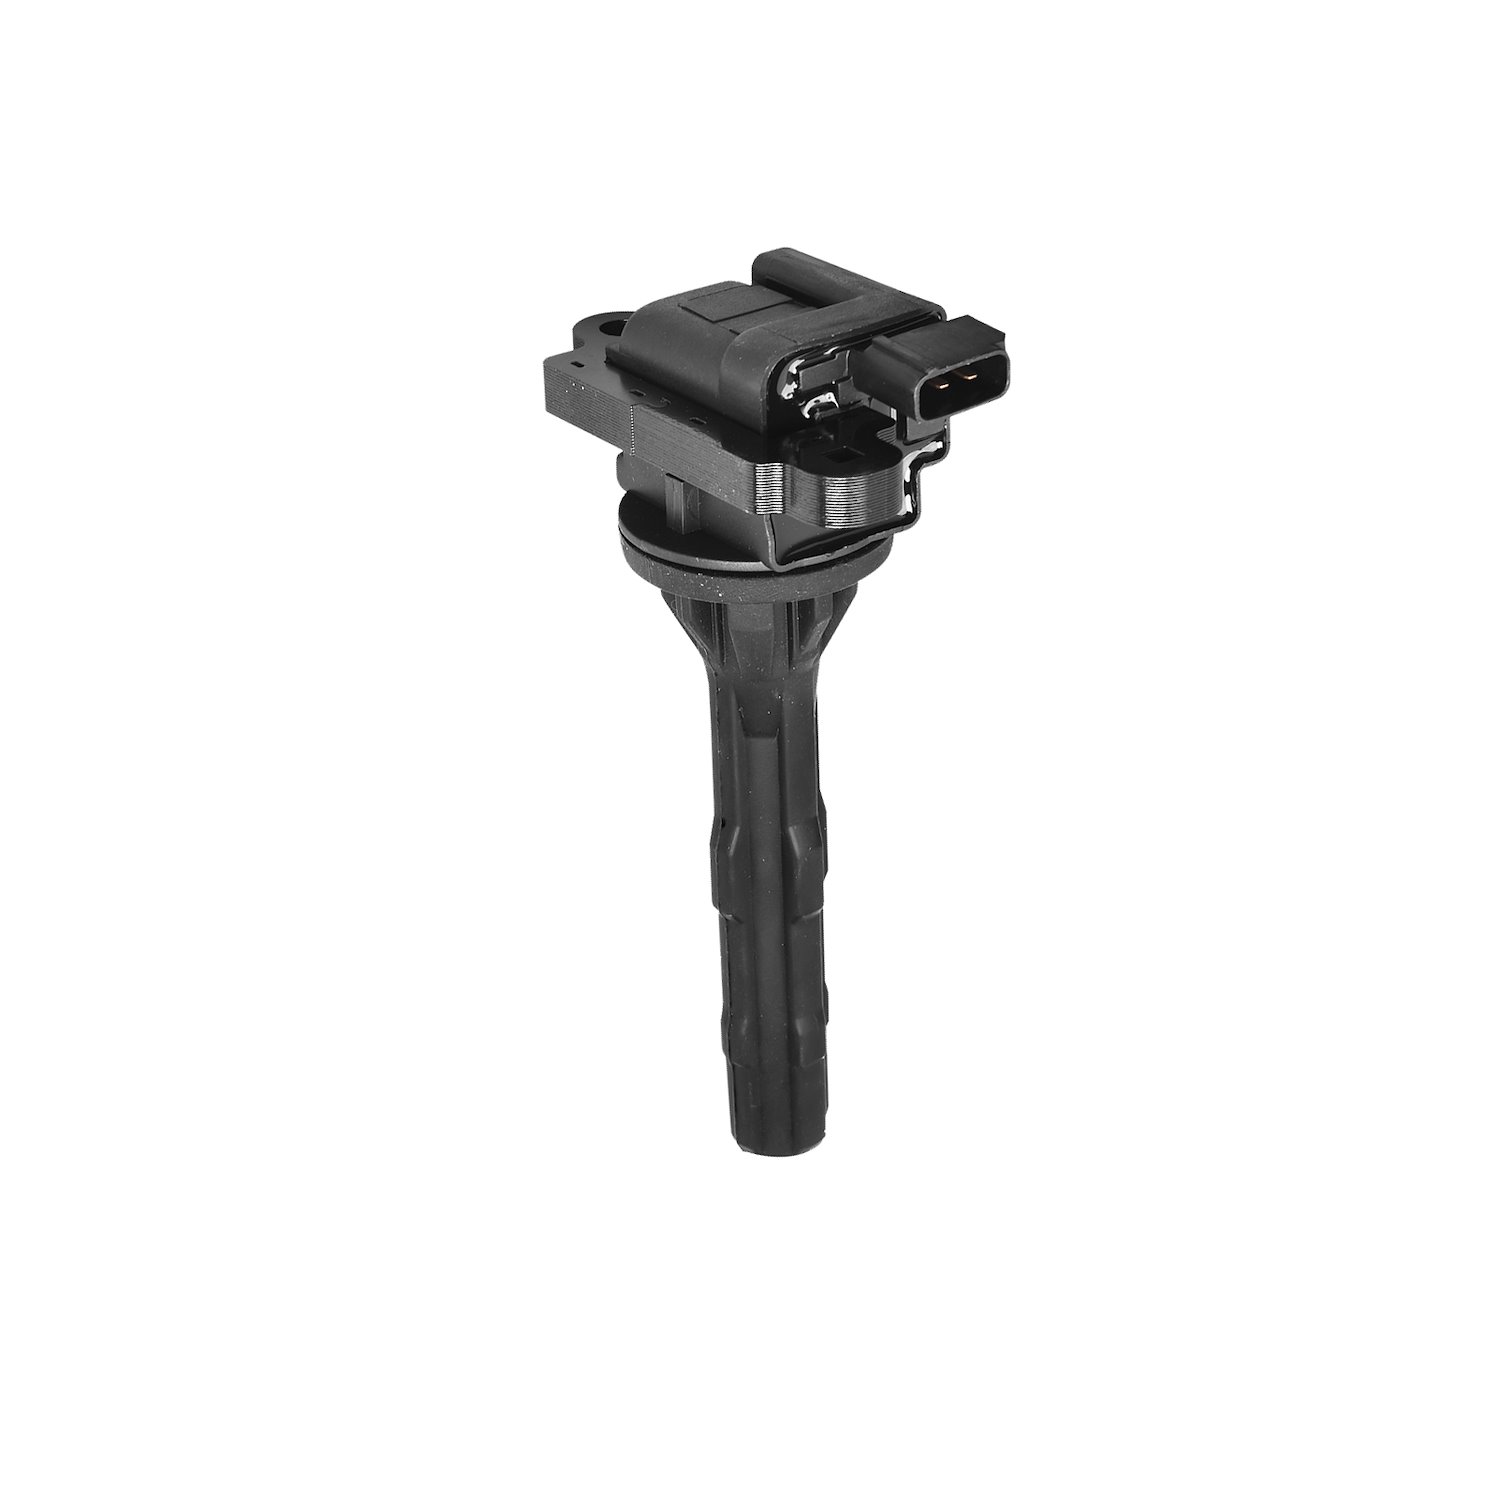 OE Replacement Ignition Coil for Suzuki